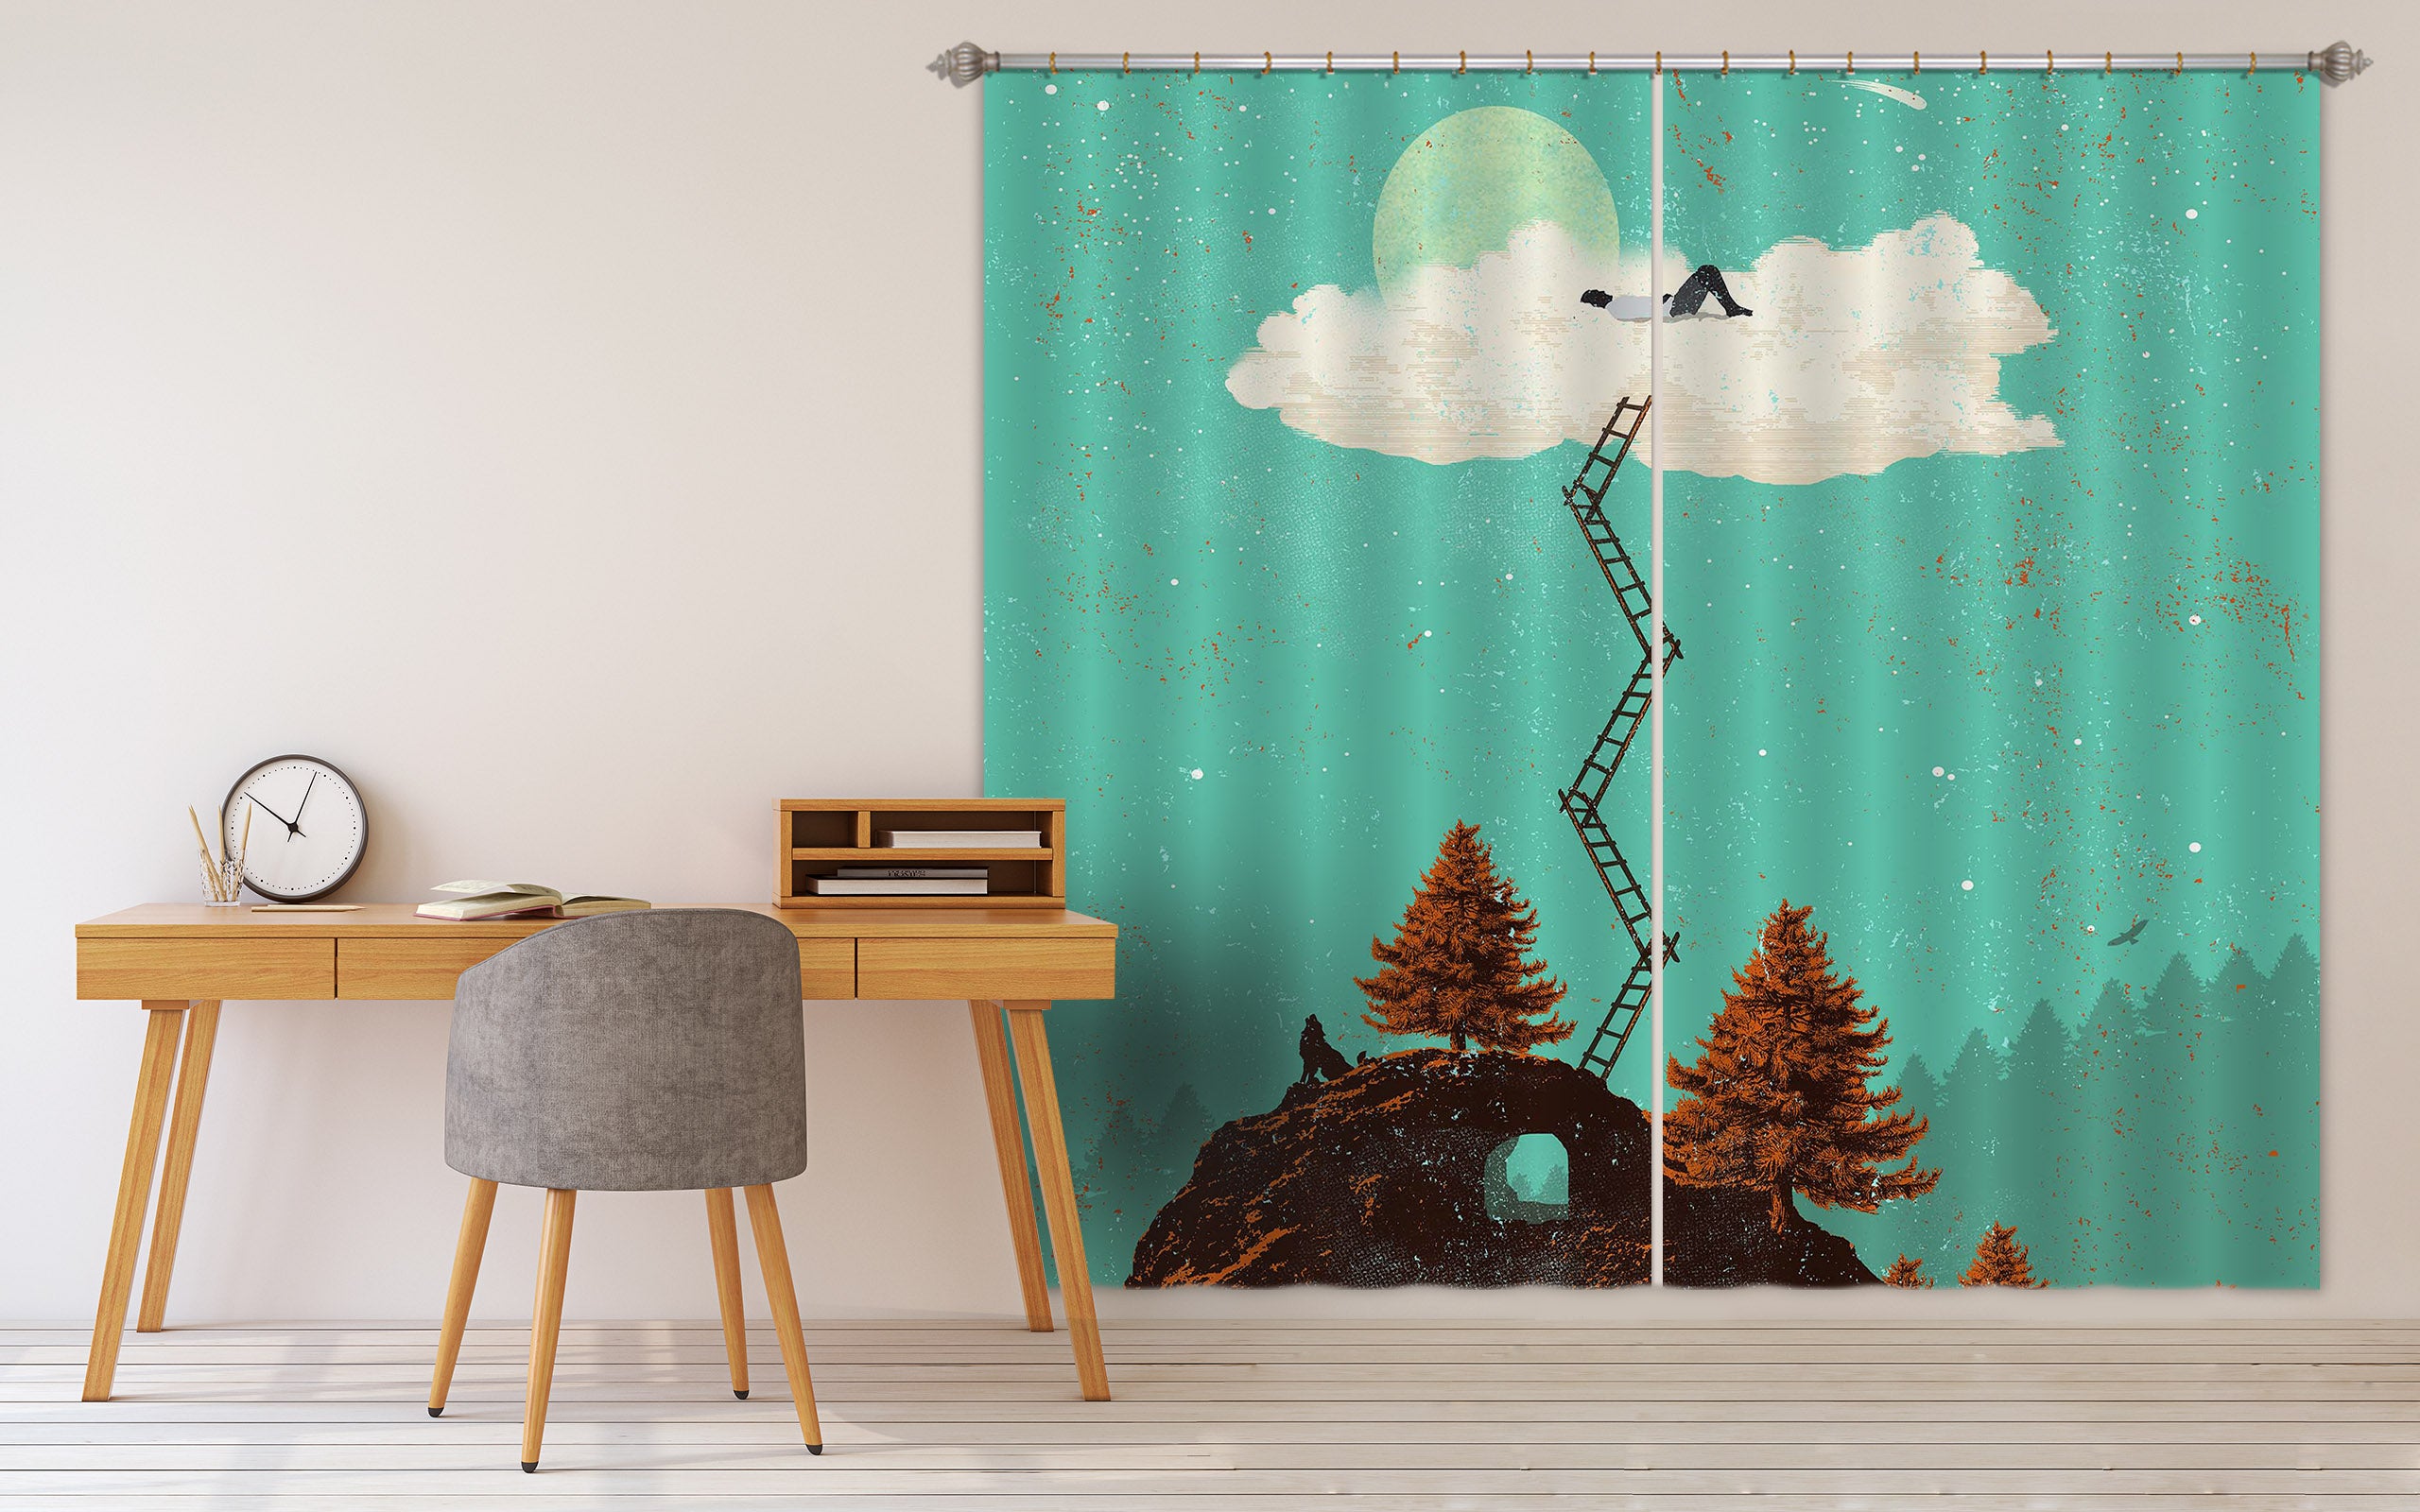 3D Sleeping In The Cloud 041 Showdeer Curtain Curtains Drapes